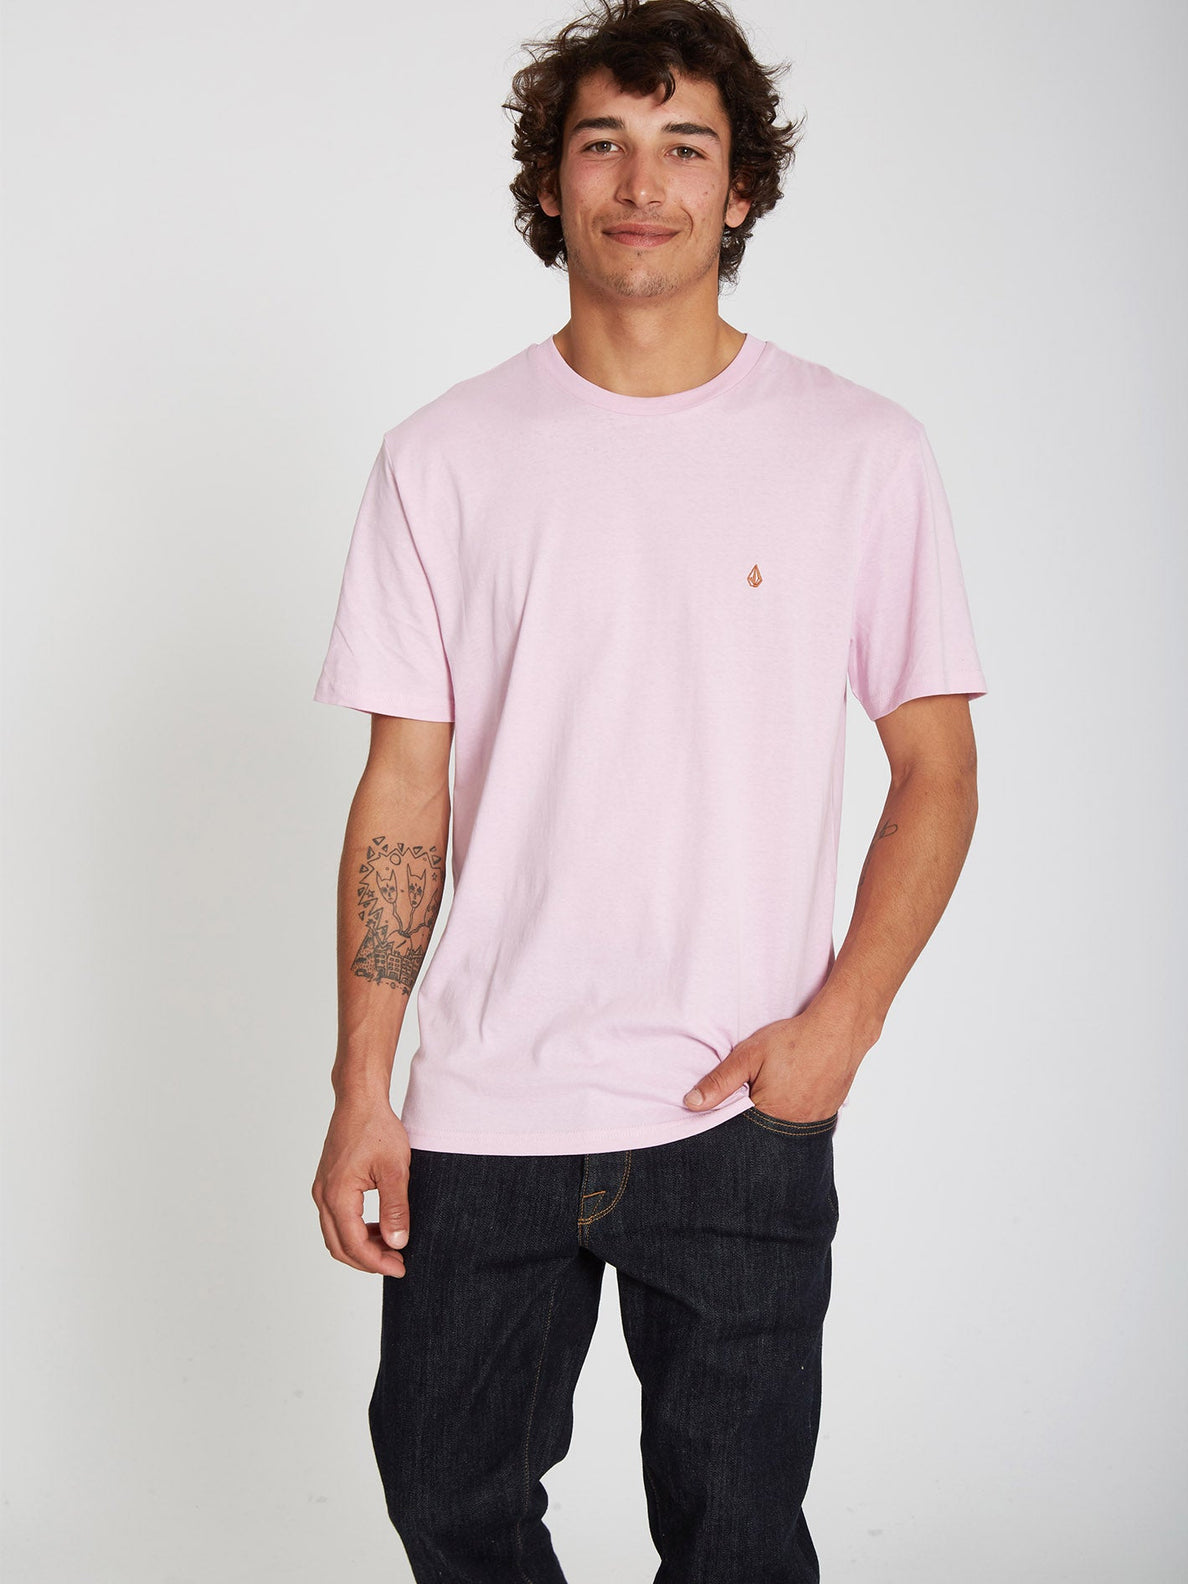 Stone Blanks T-shirt - PARADISE PINK (A3512056_PDP) [13]